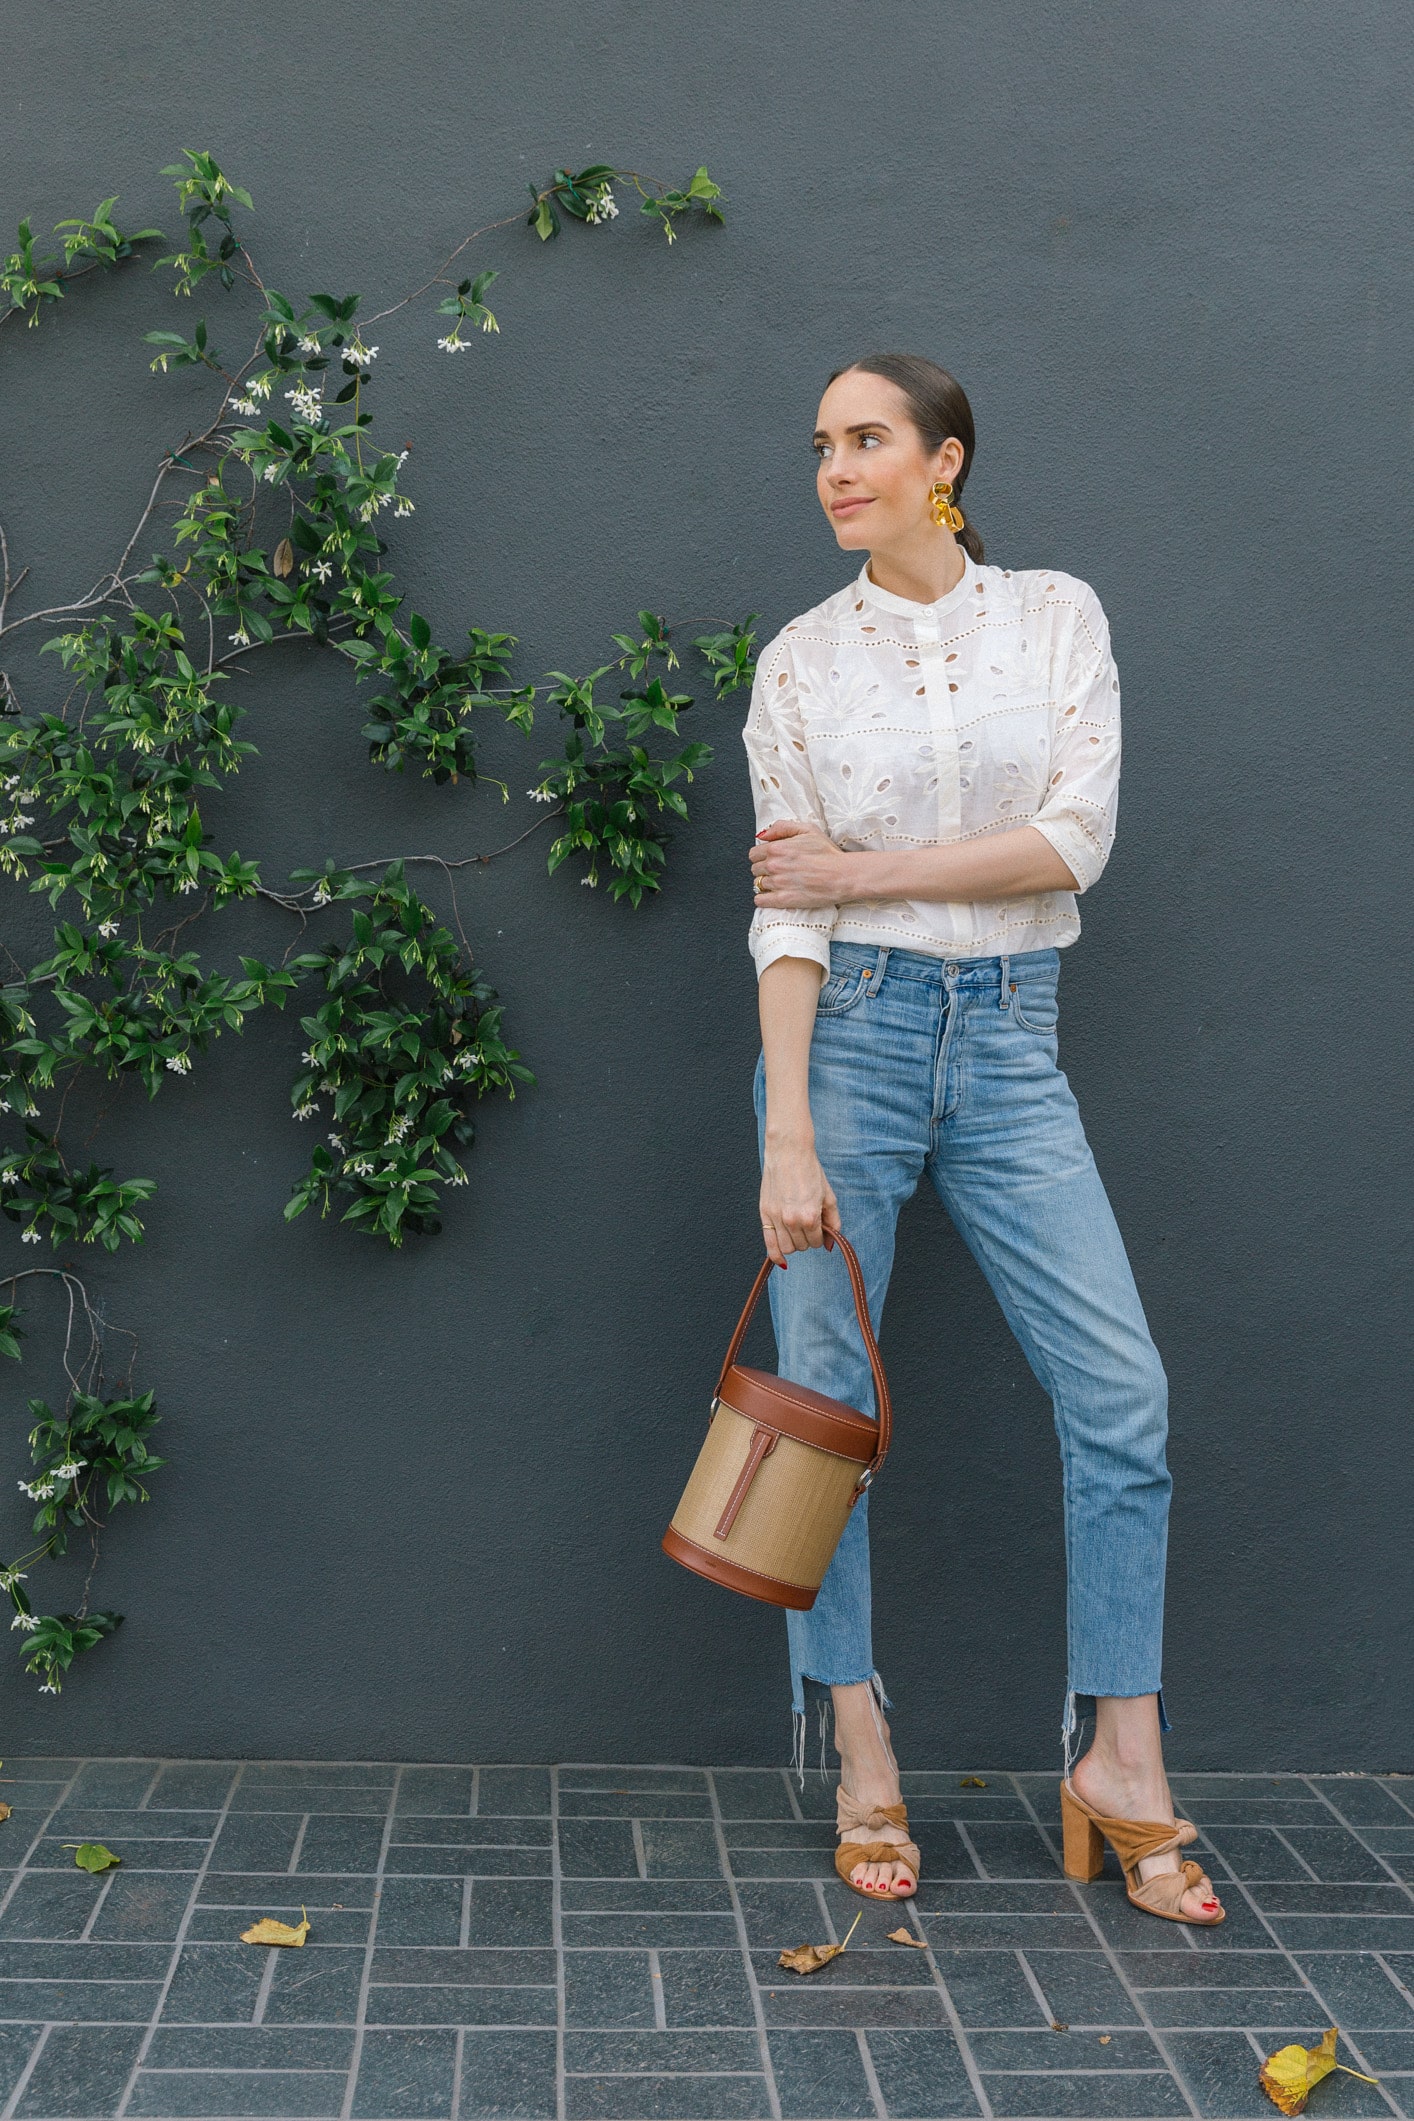 Louise Roe gives fashion advice on what to wear when you meet the parents